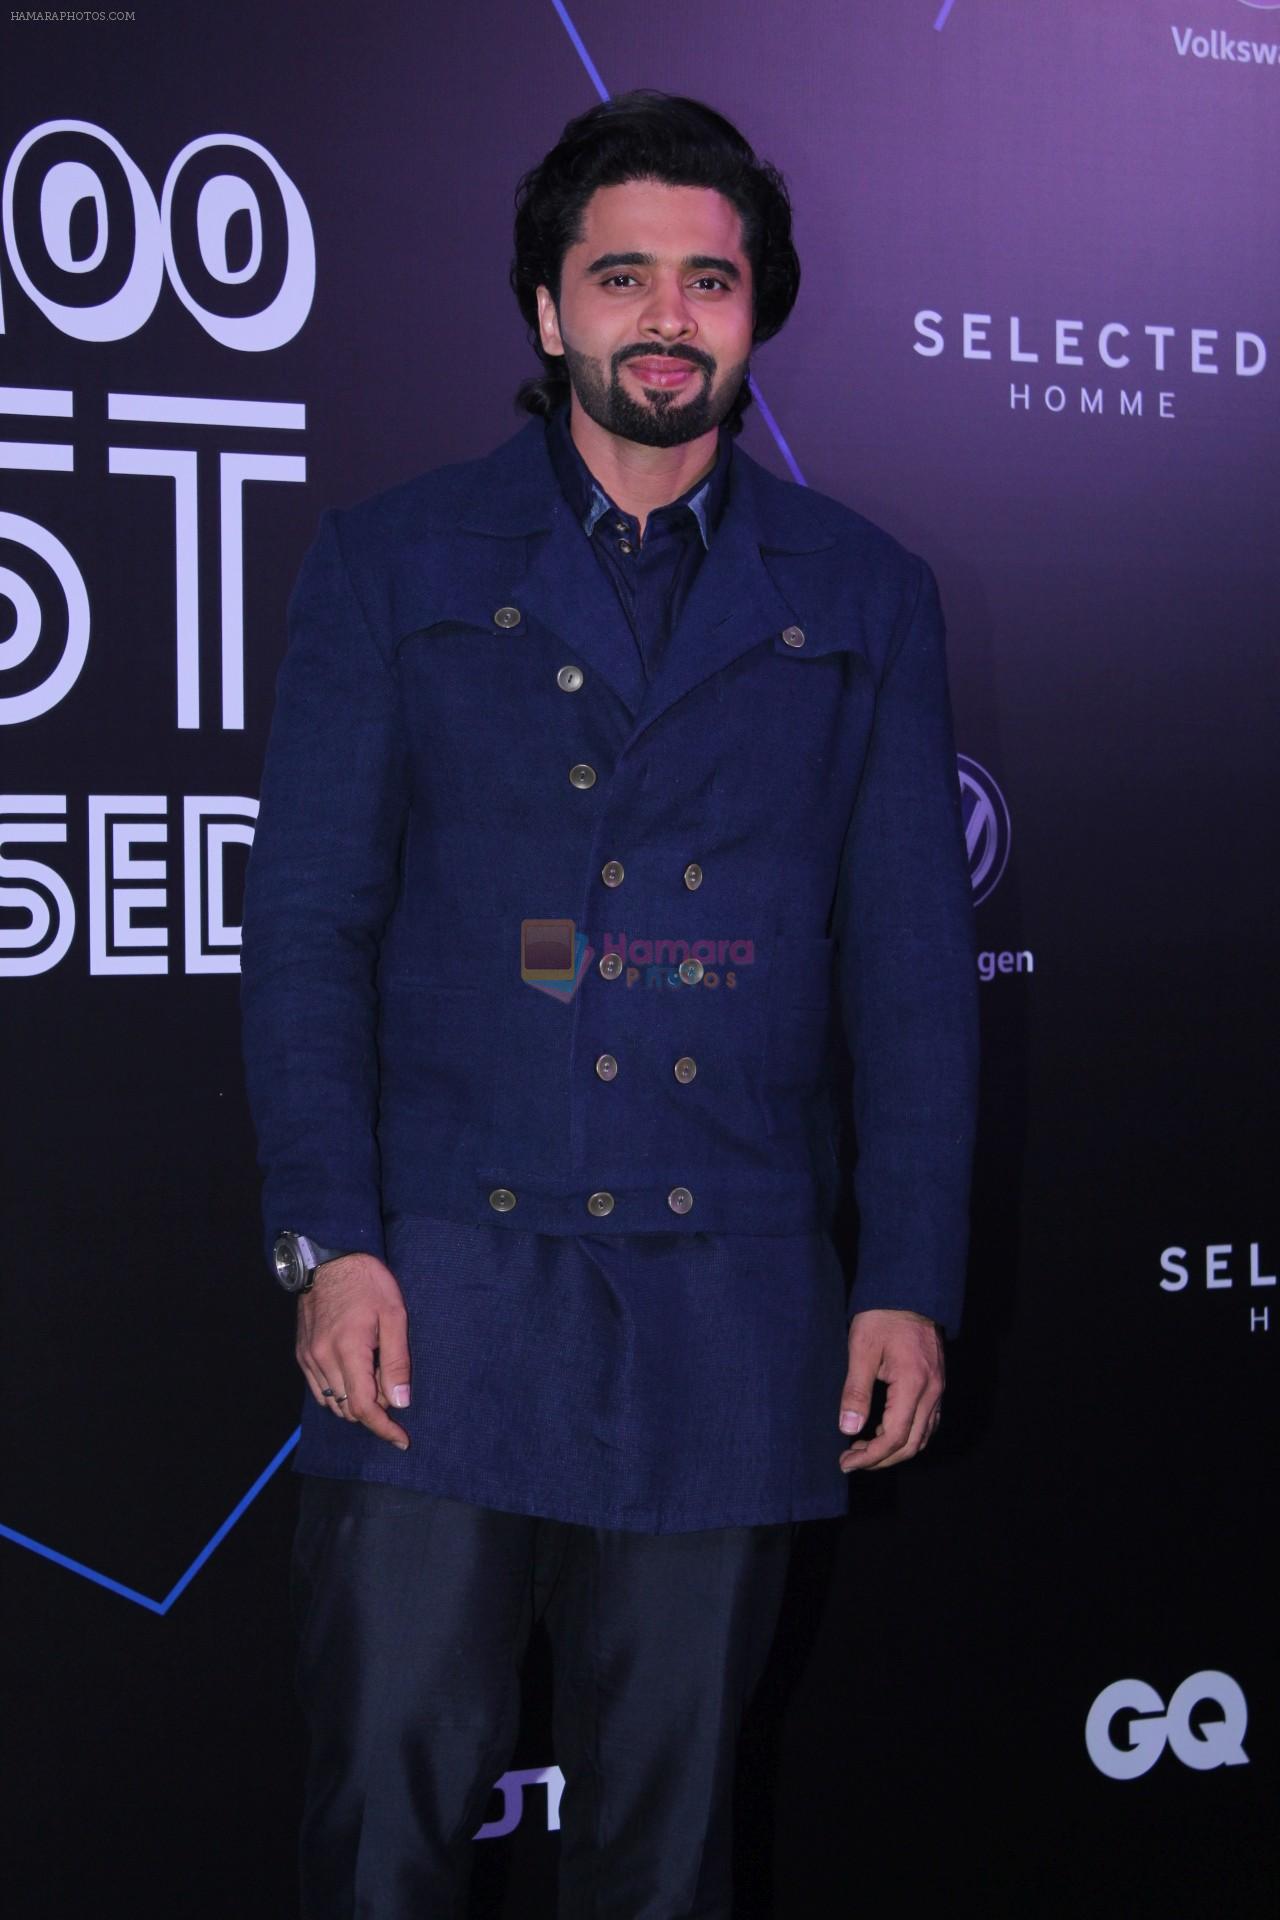 Jackky Bhagnani at GQ 100 Best Dressed Awards 2019 on 2nd June 2019